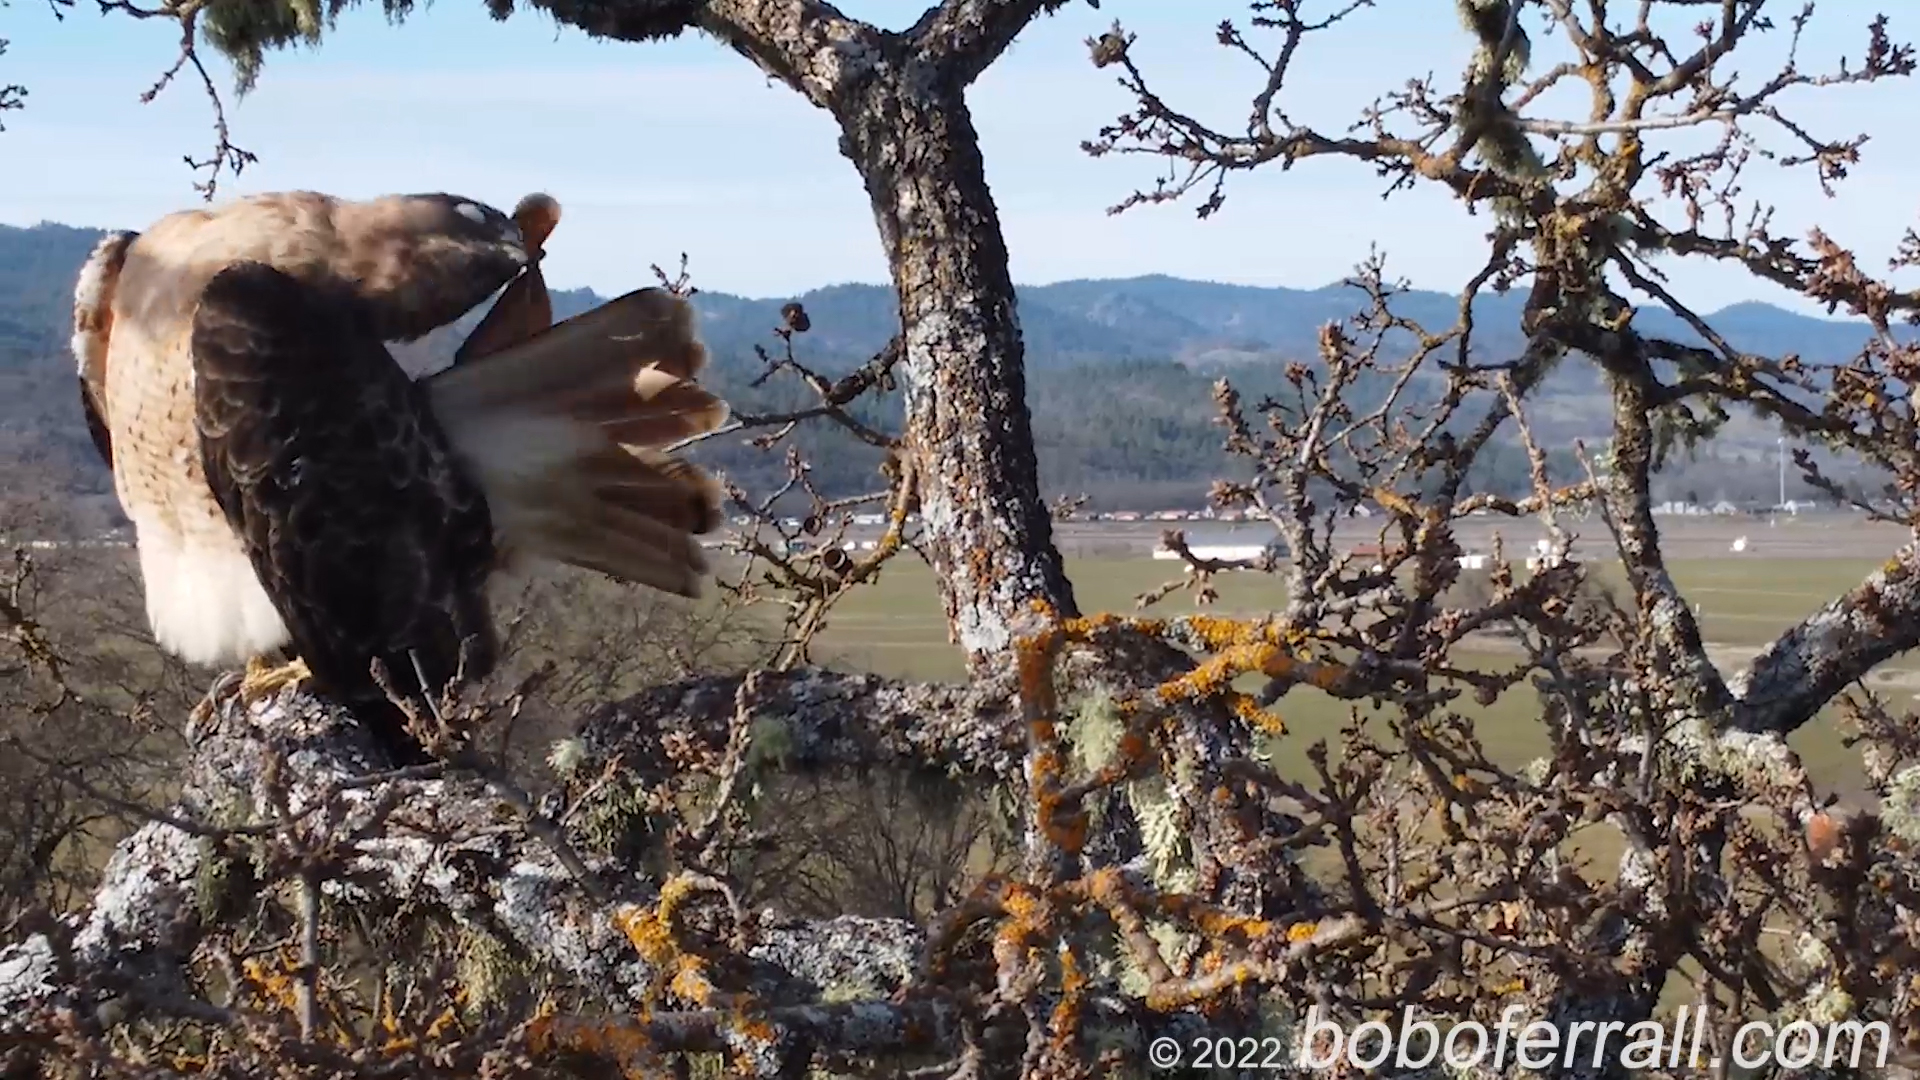 This Bathing  Red Tailed Hawk is obviously a friend of mine, and spends the entire video bathing. Be prepared to see very cool red-tailed beauty while this Hawk shows a lot of fluff